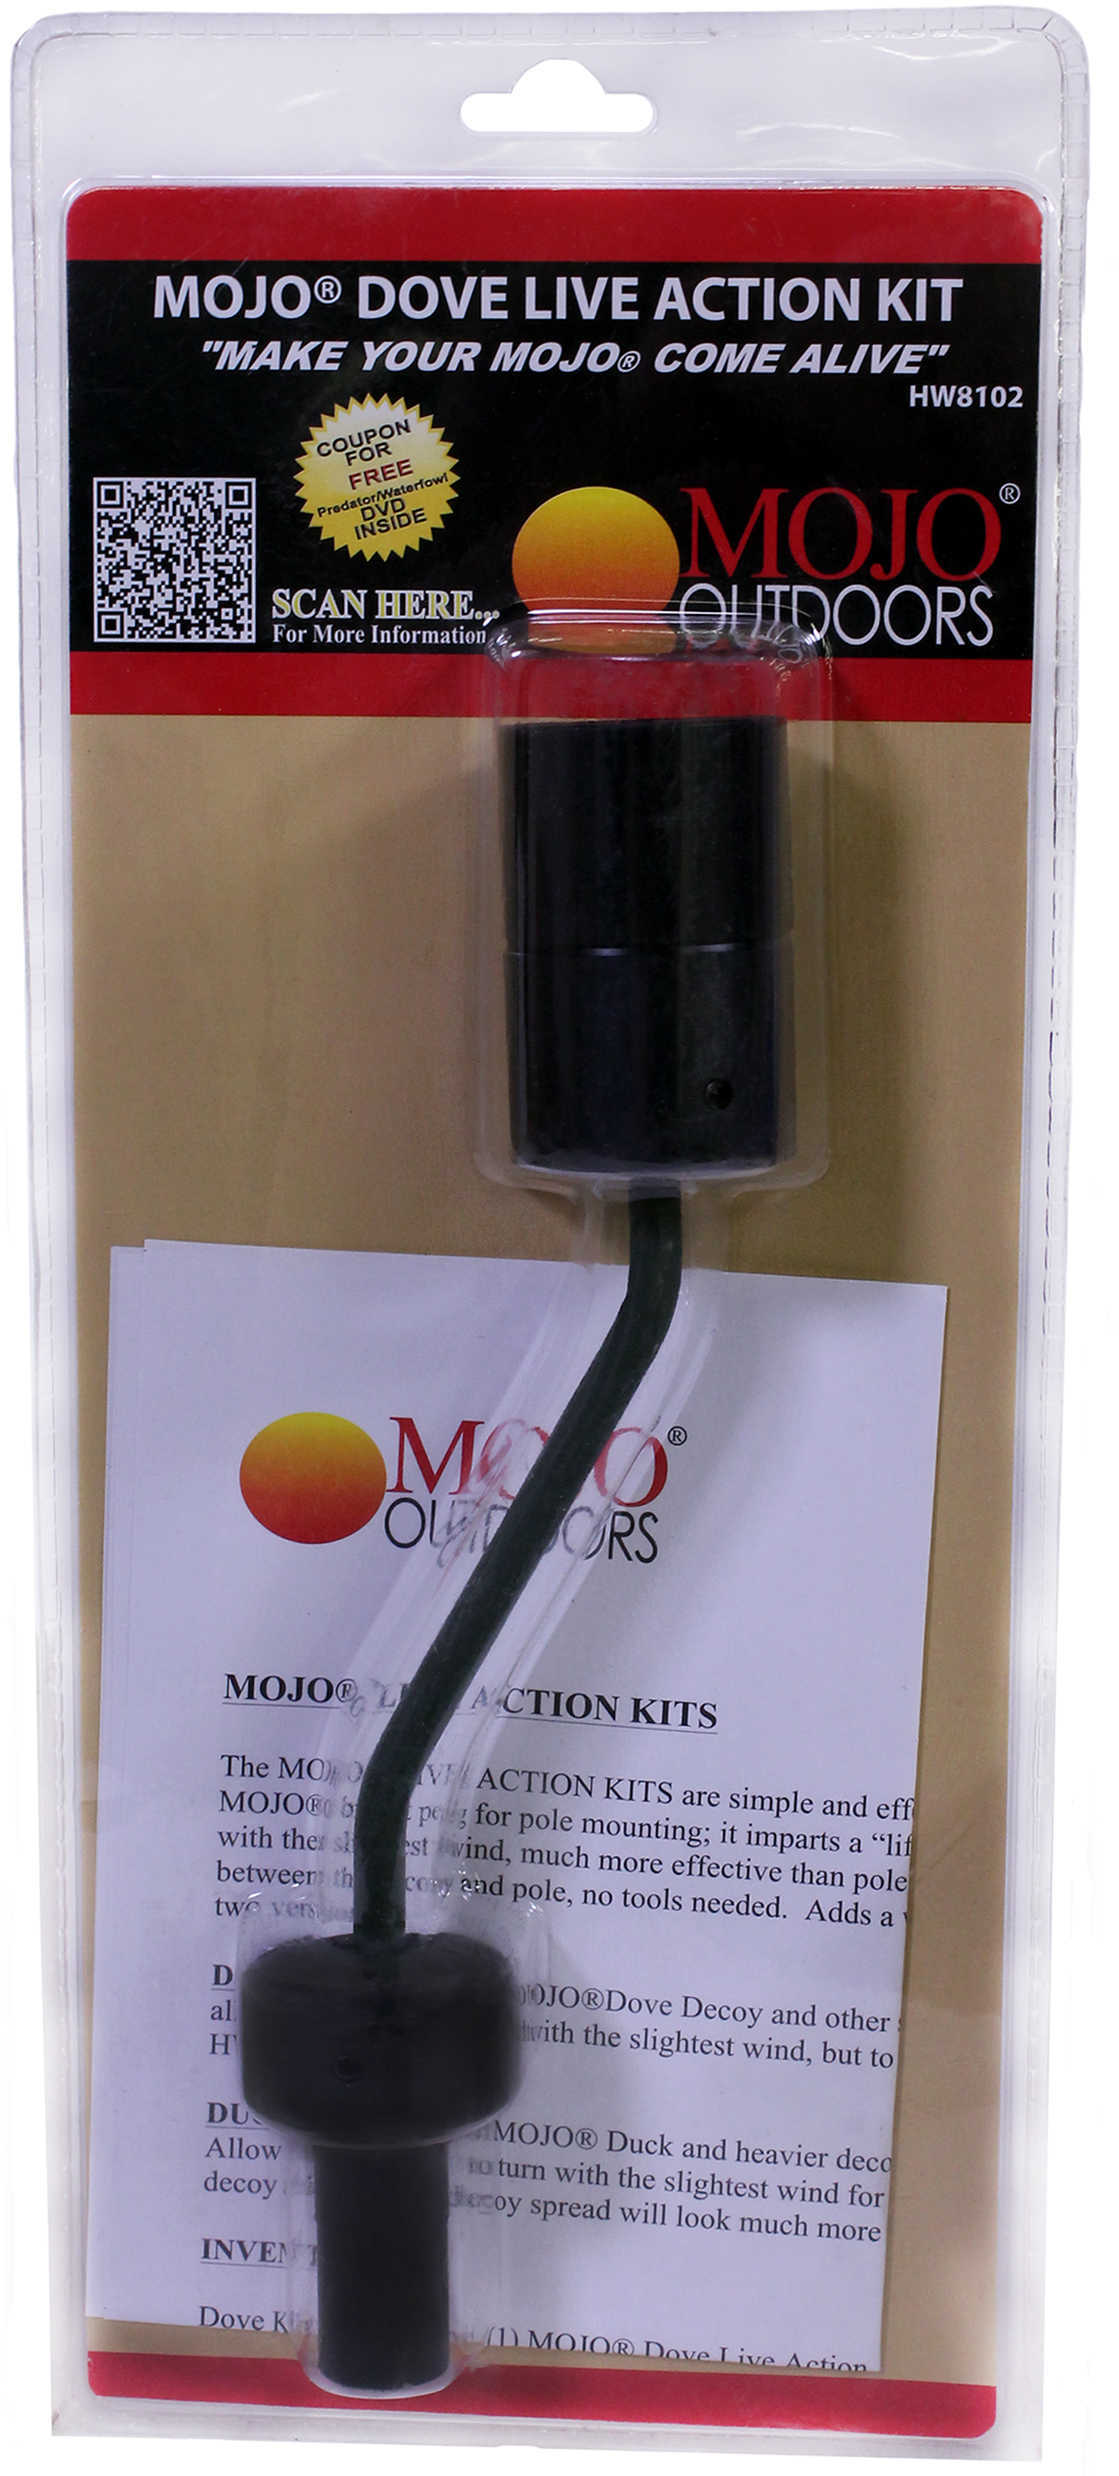 Mojo Live Action Kit For Most Products With Built In Peg Md: HW8102